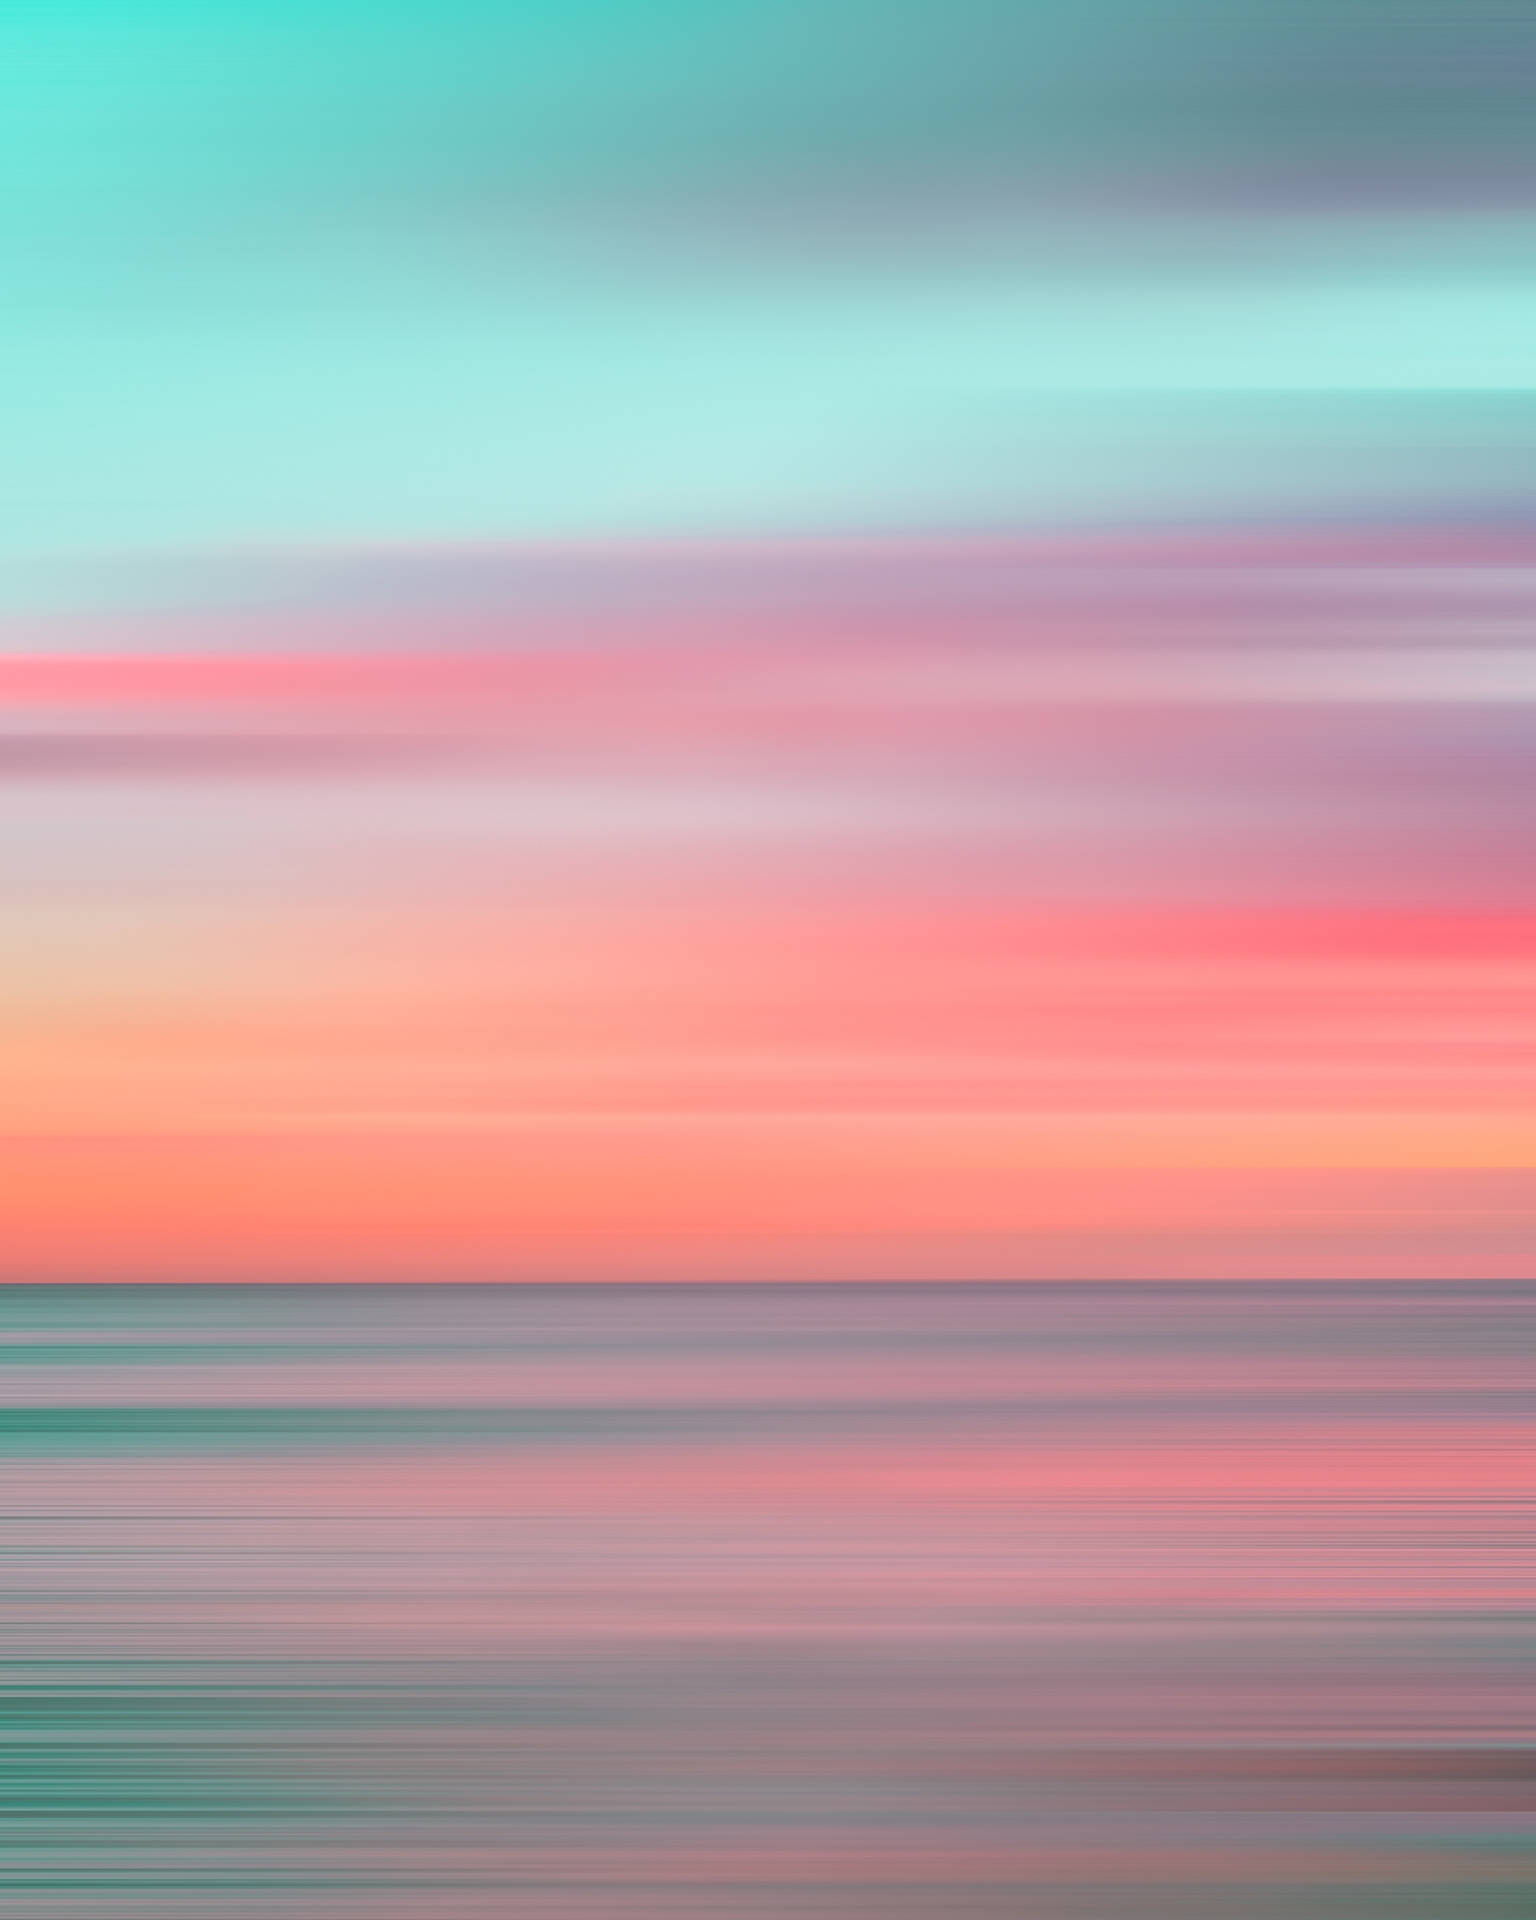 Pastel 6554X8192 Wallpaper and Background Image